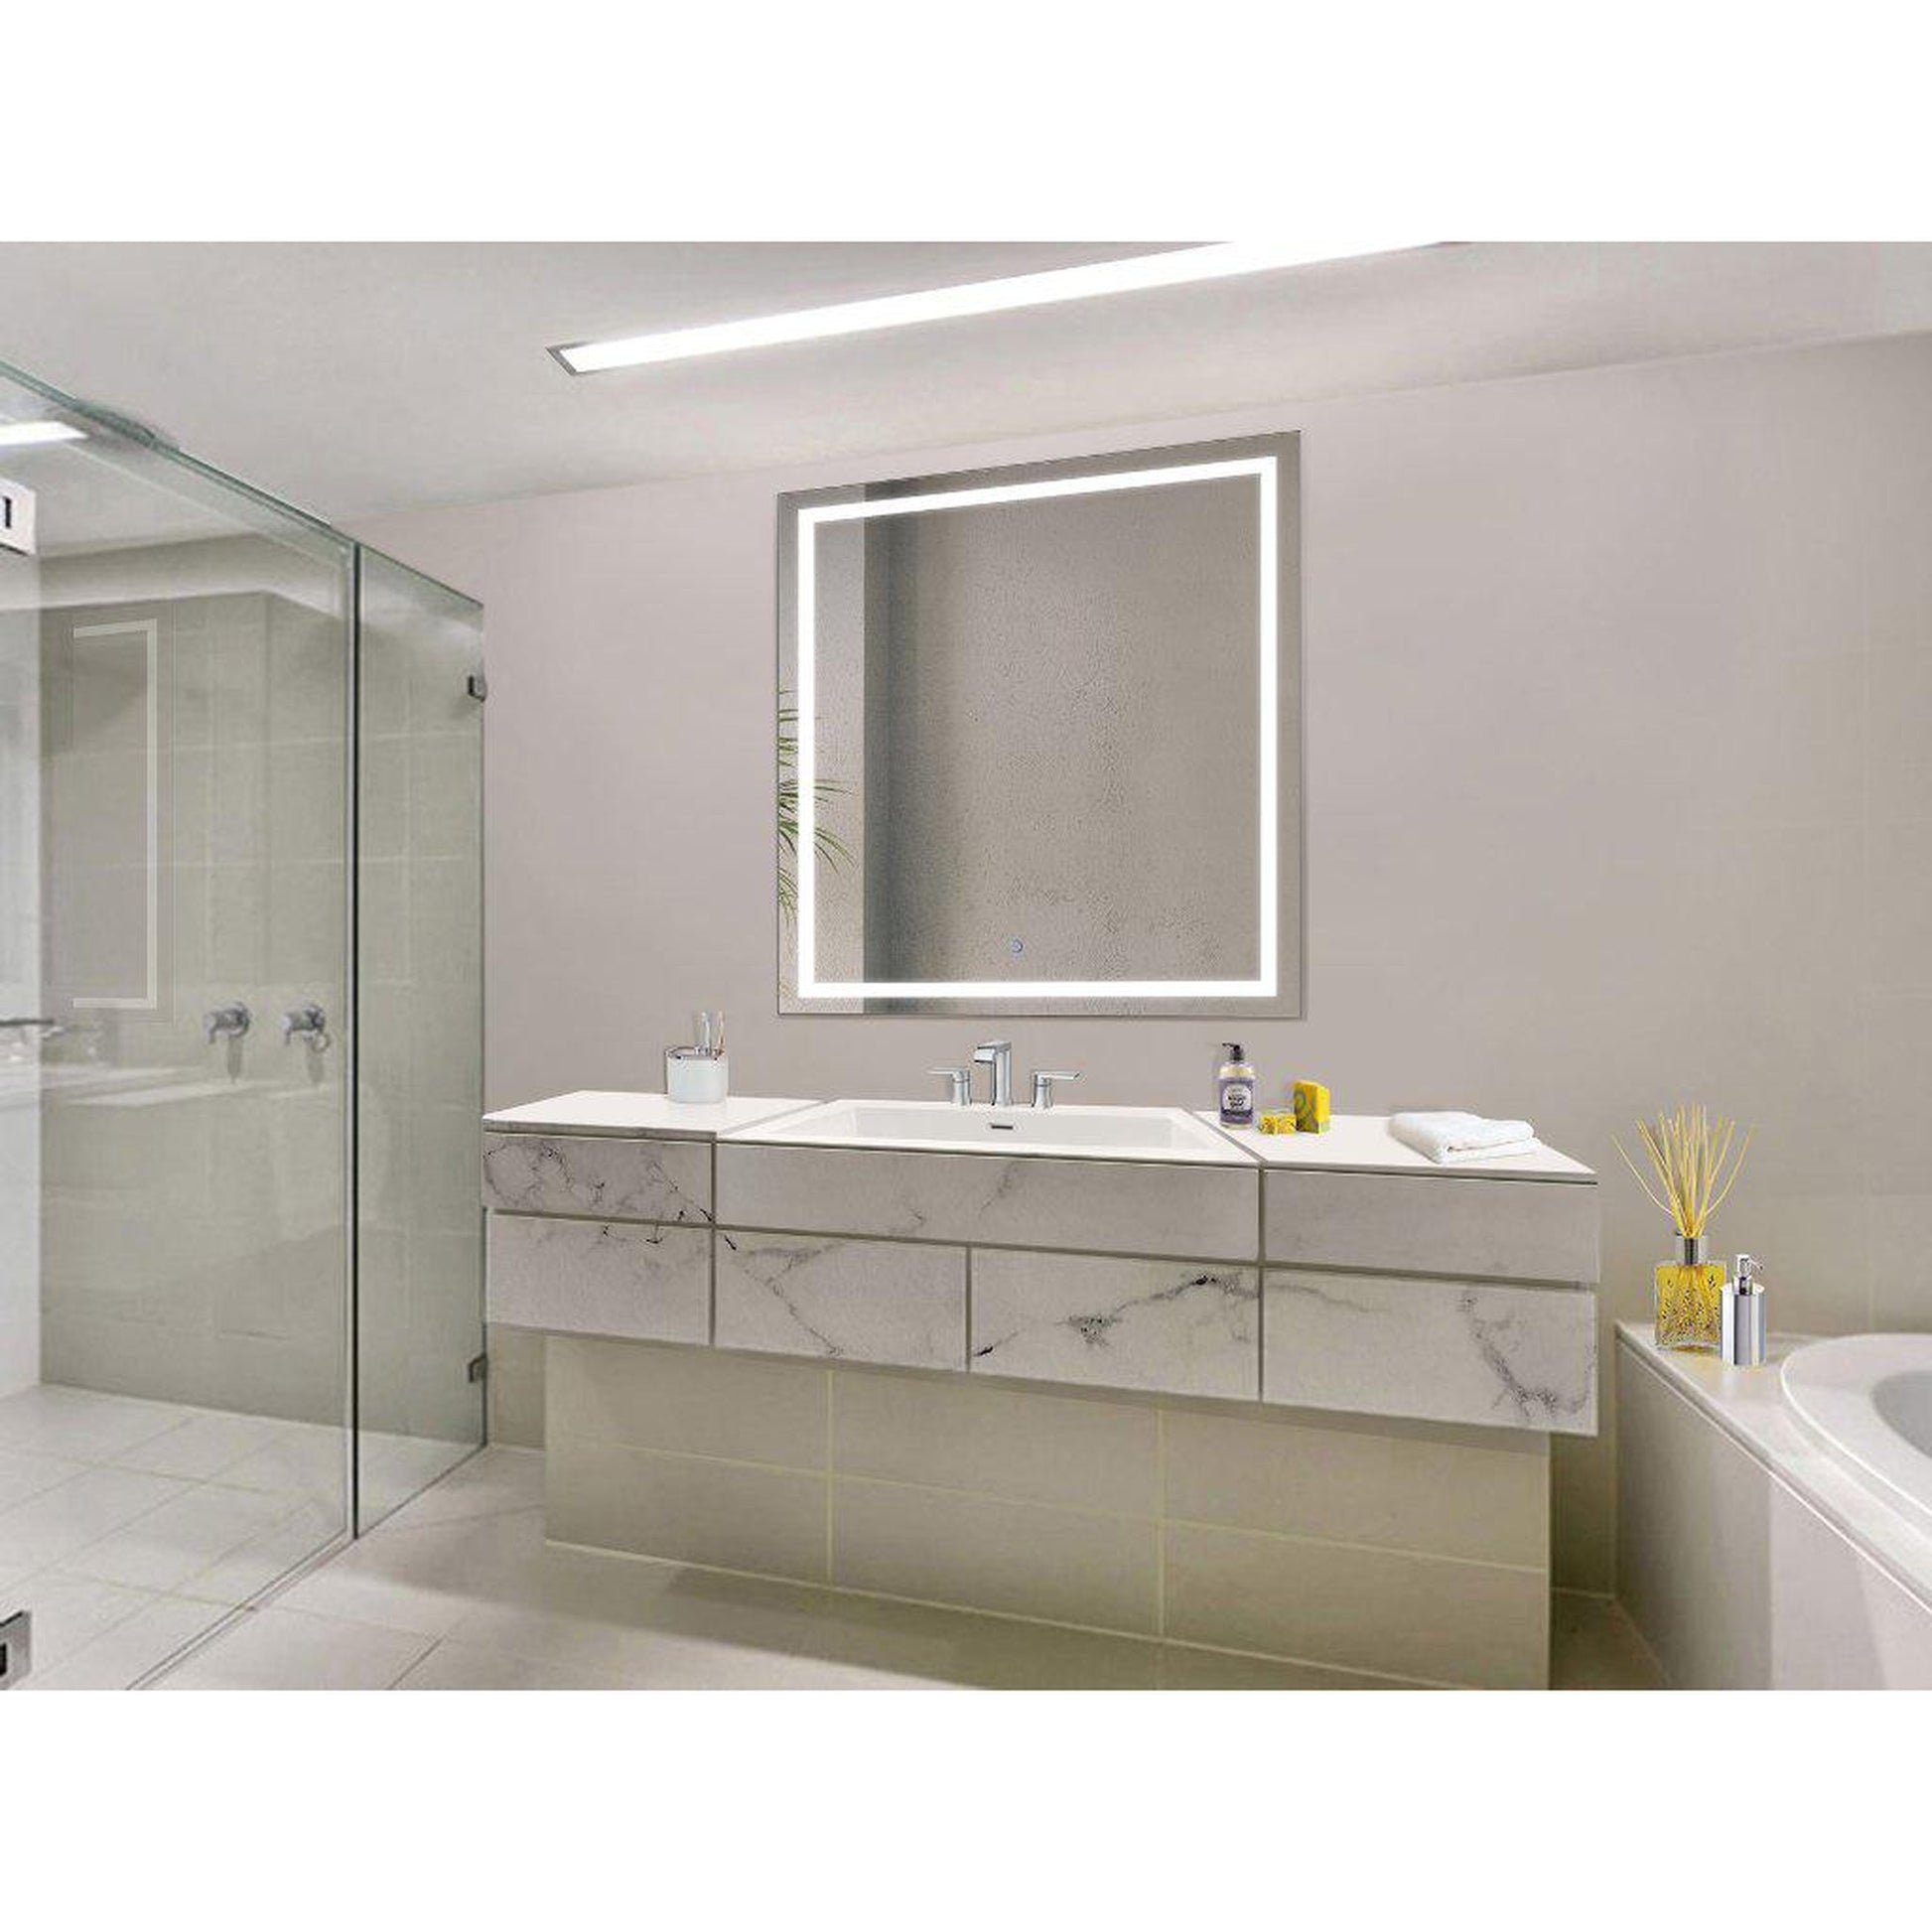 Krugg Reflections Icon 42” x 42” 5000K Square Wall-Mounted Illuminated Silver Backed LED Mirror With Built-in Defogger and Touch Sensor On/Off Built-in Dimmer